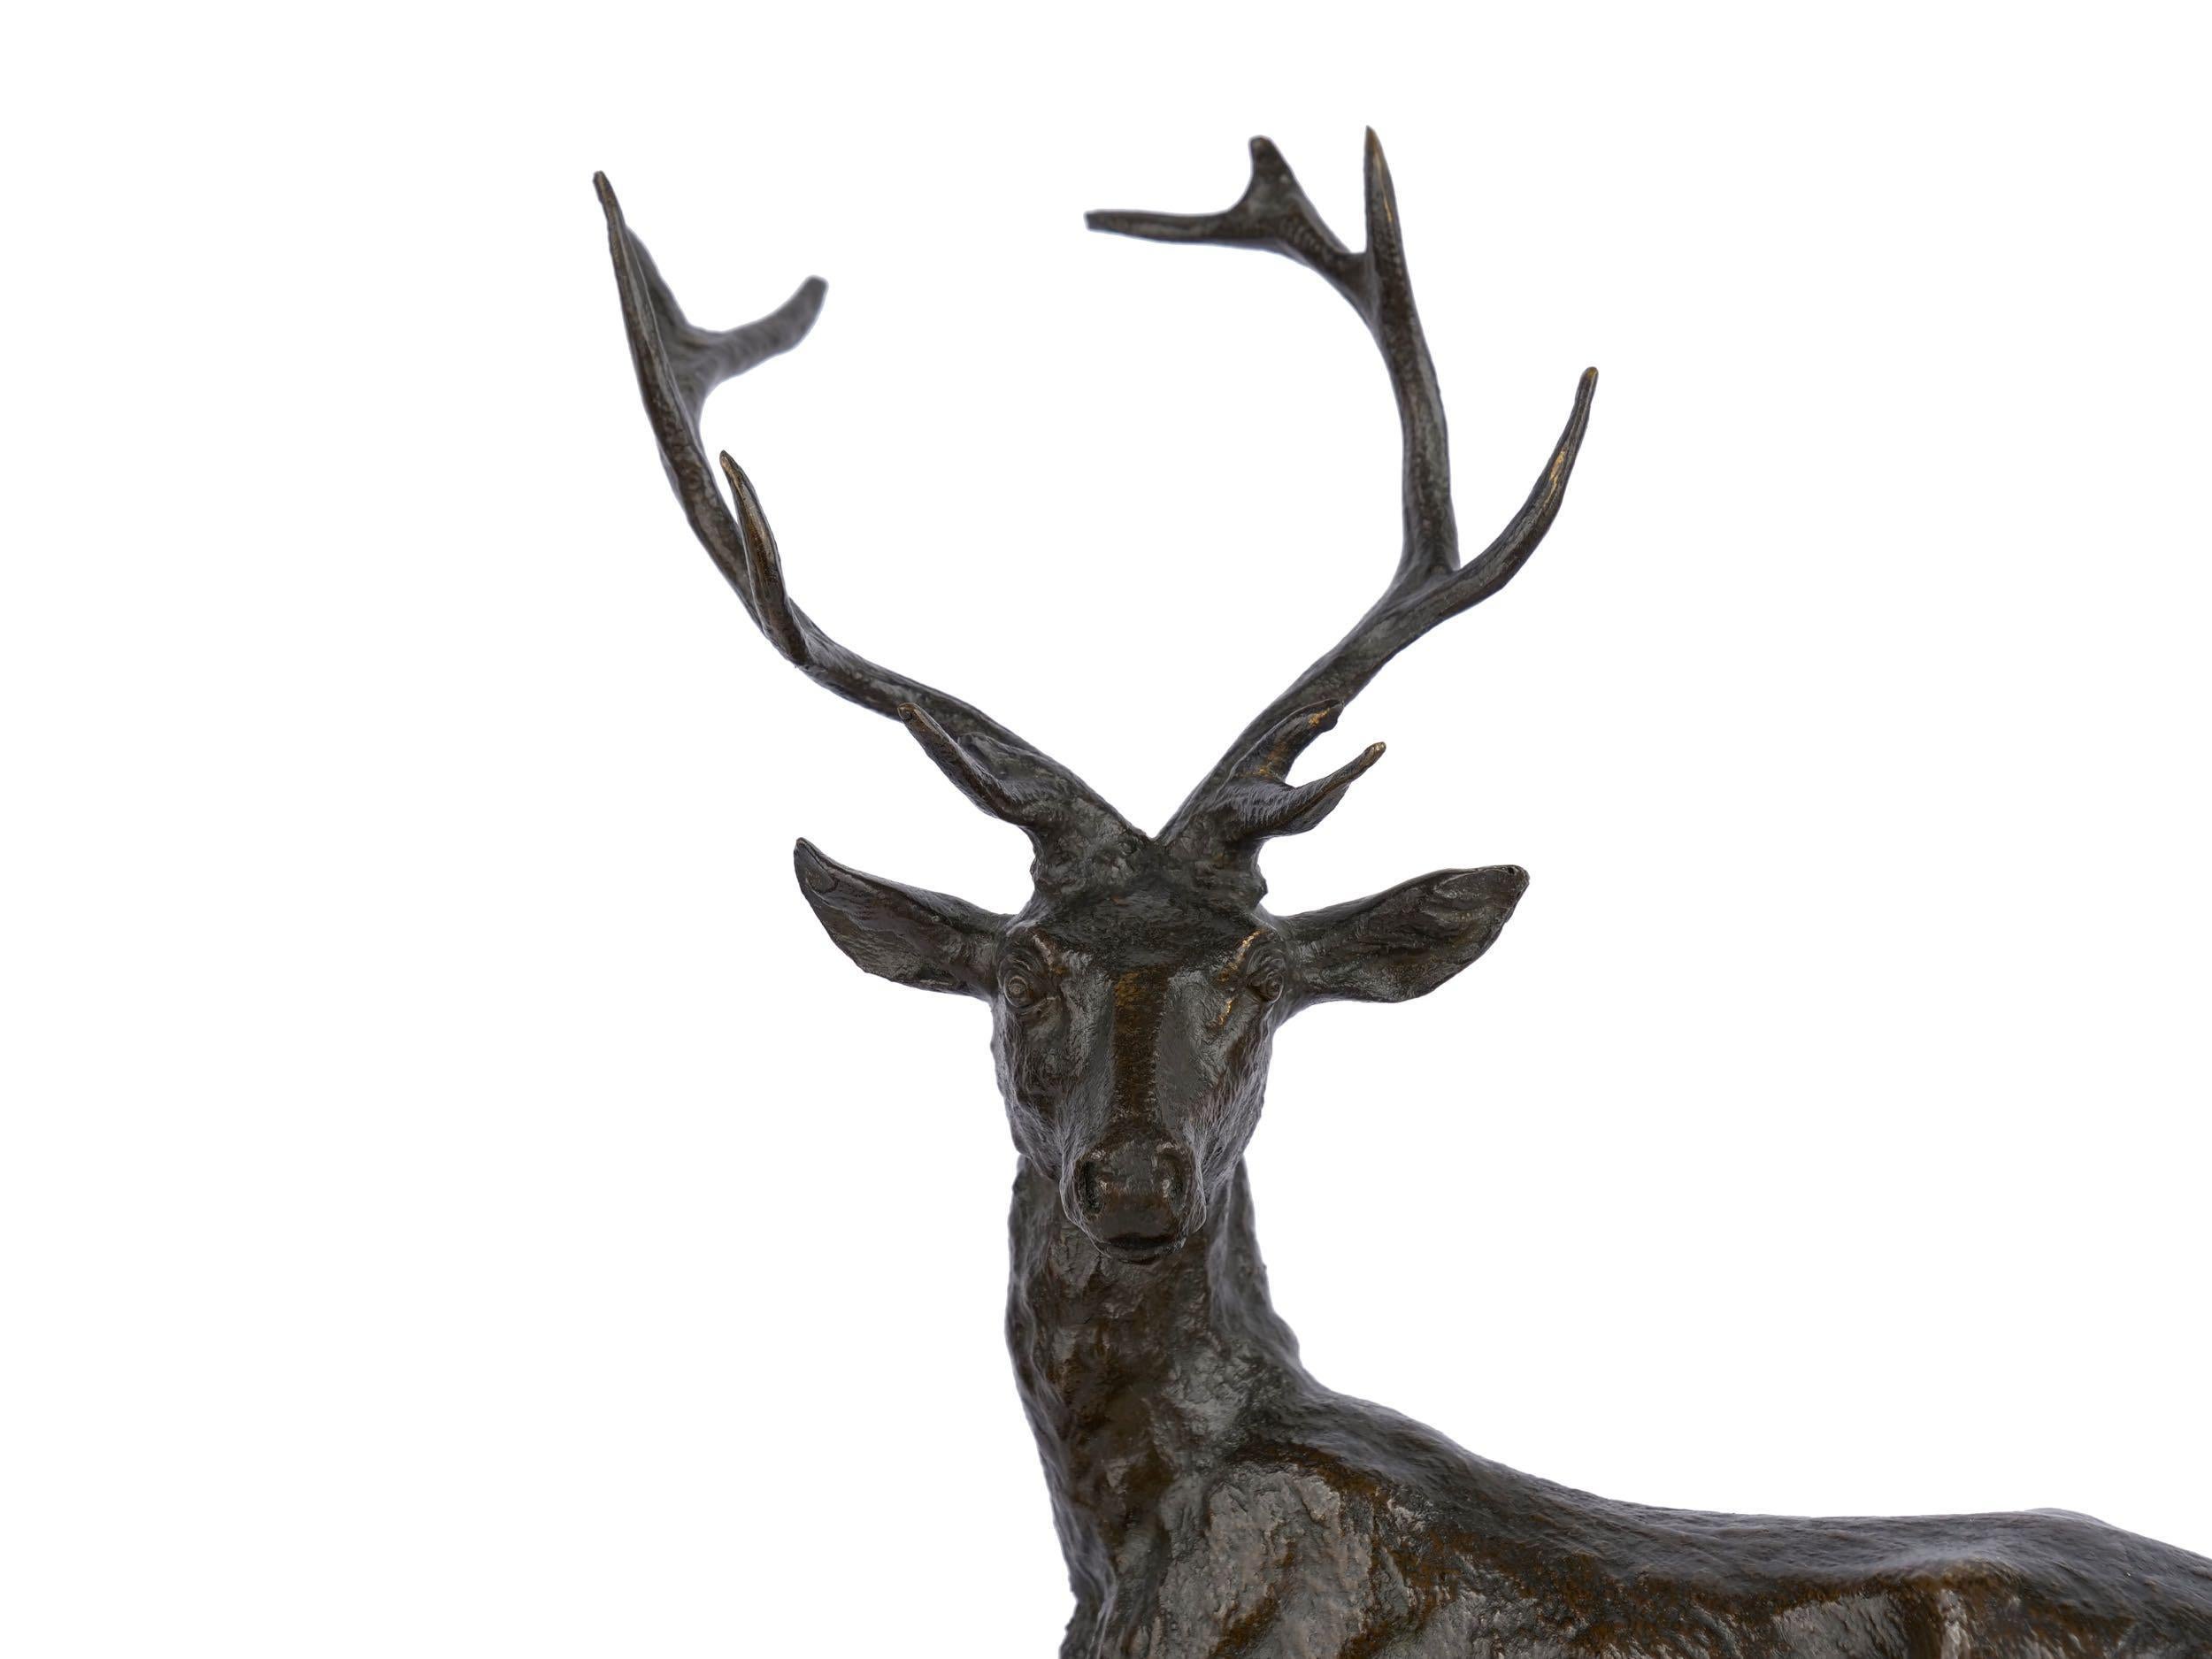 Bronze Sculpture Group “Family of Deer” by Christophe Fratin & Debraux Foundry 2